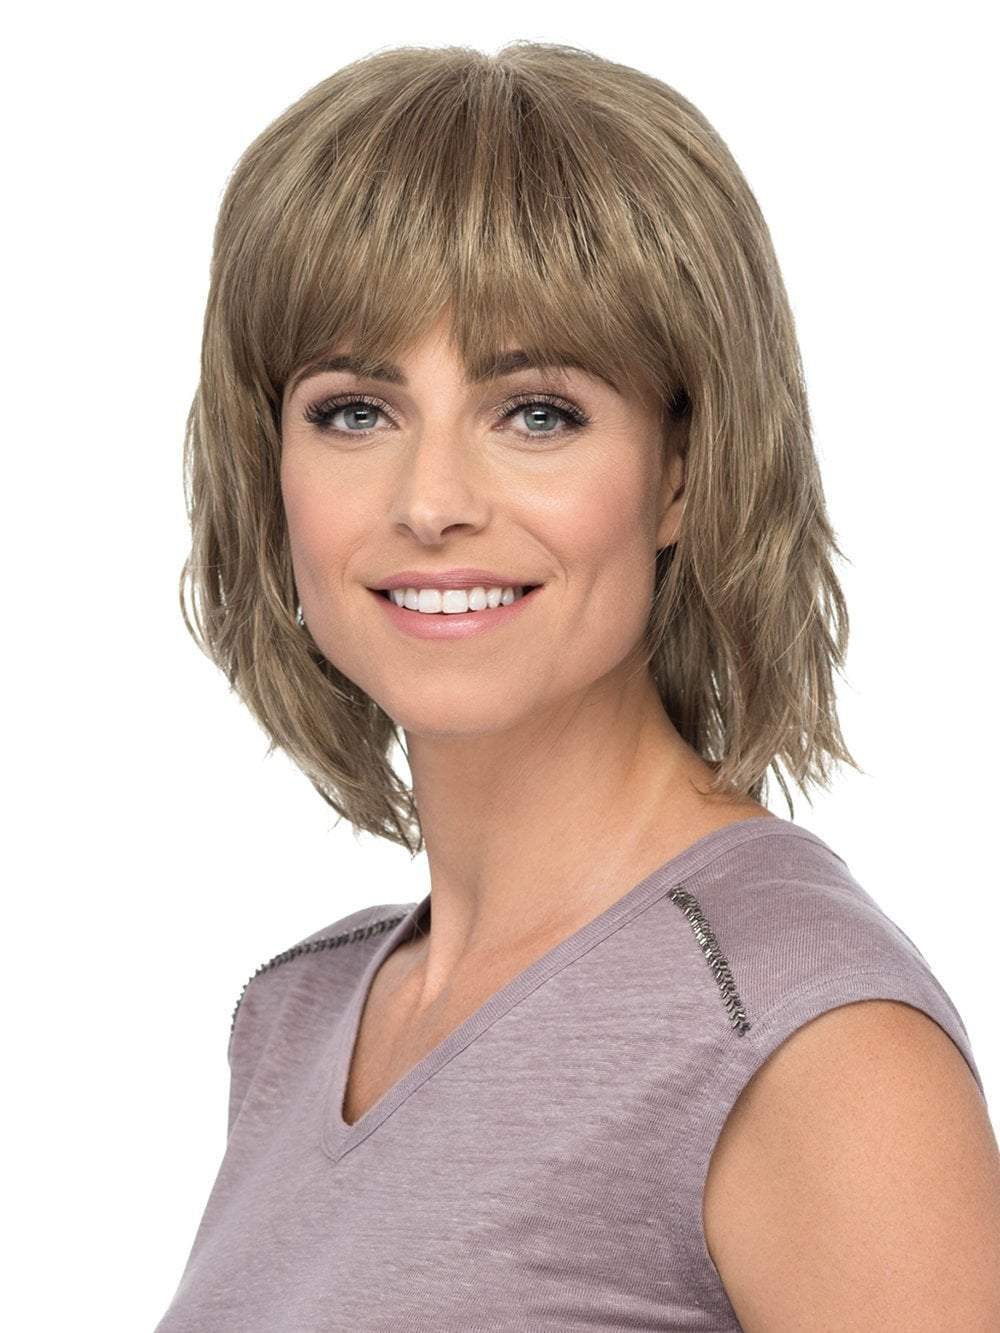 Hunter is a fresh, fun bob with full bangs and texturized tousled locks